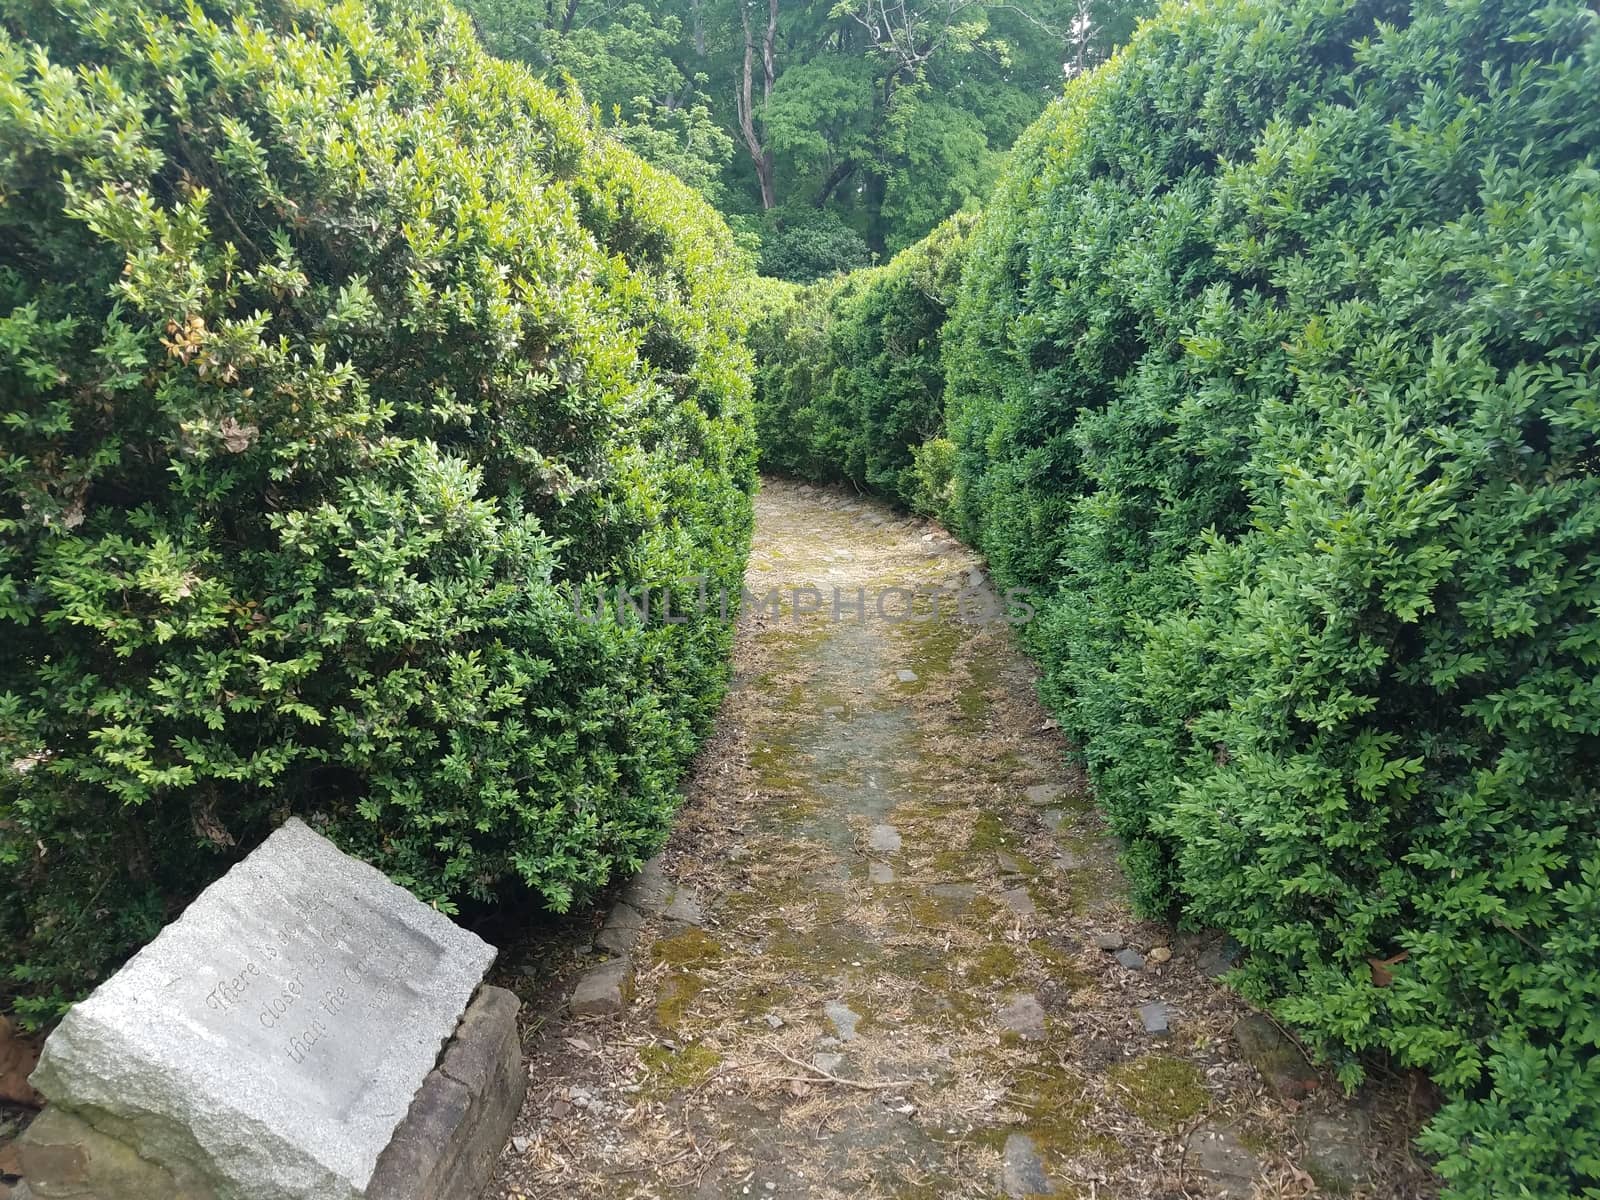 old brick or stone path or trail in the garden with green bushes and stone inscription